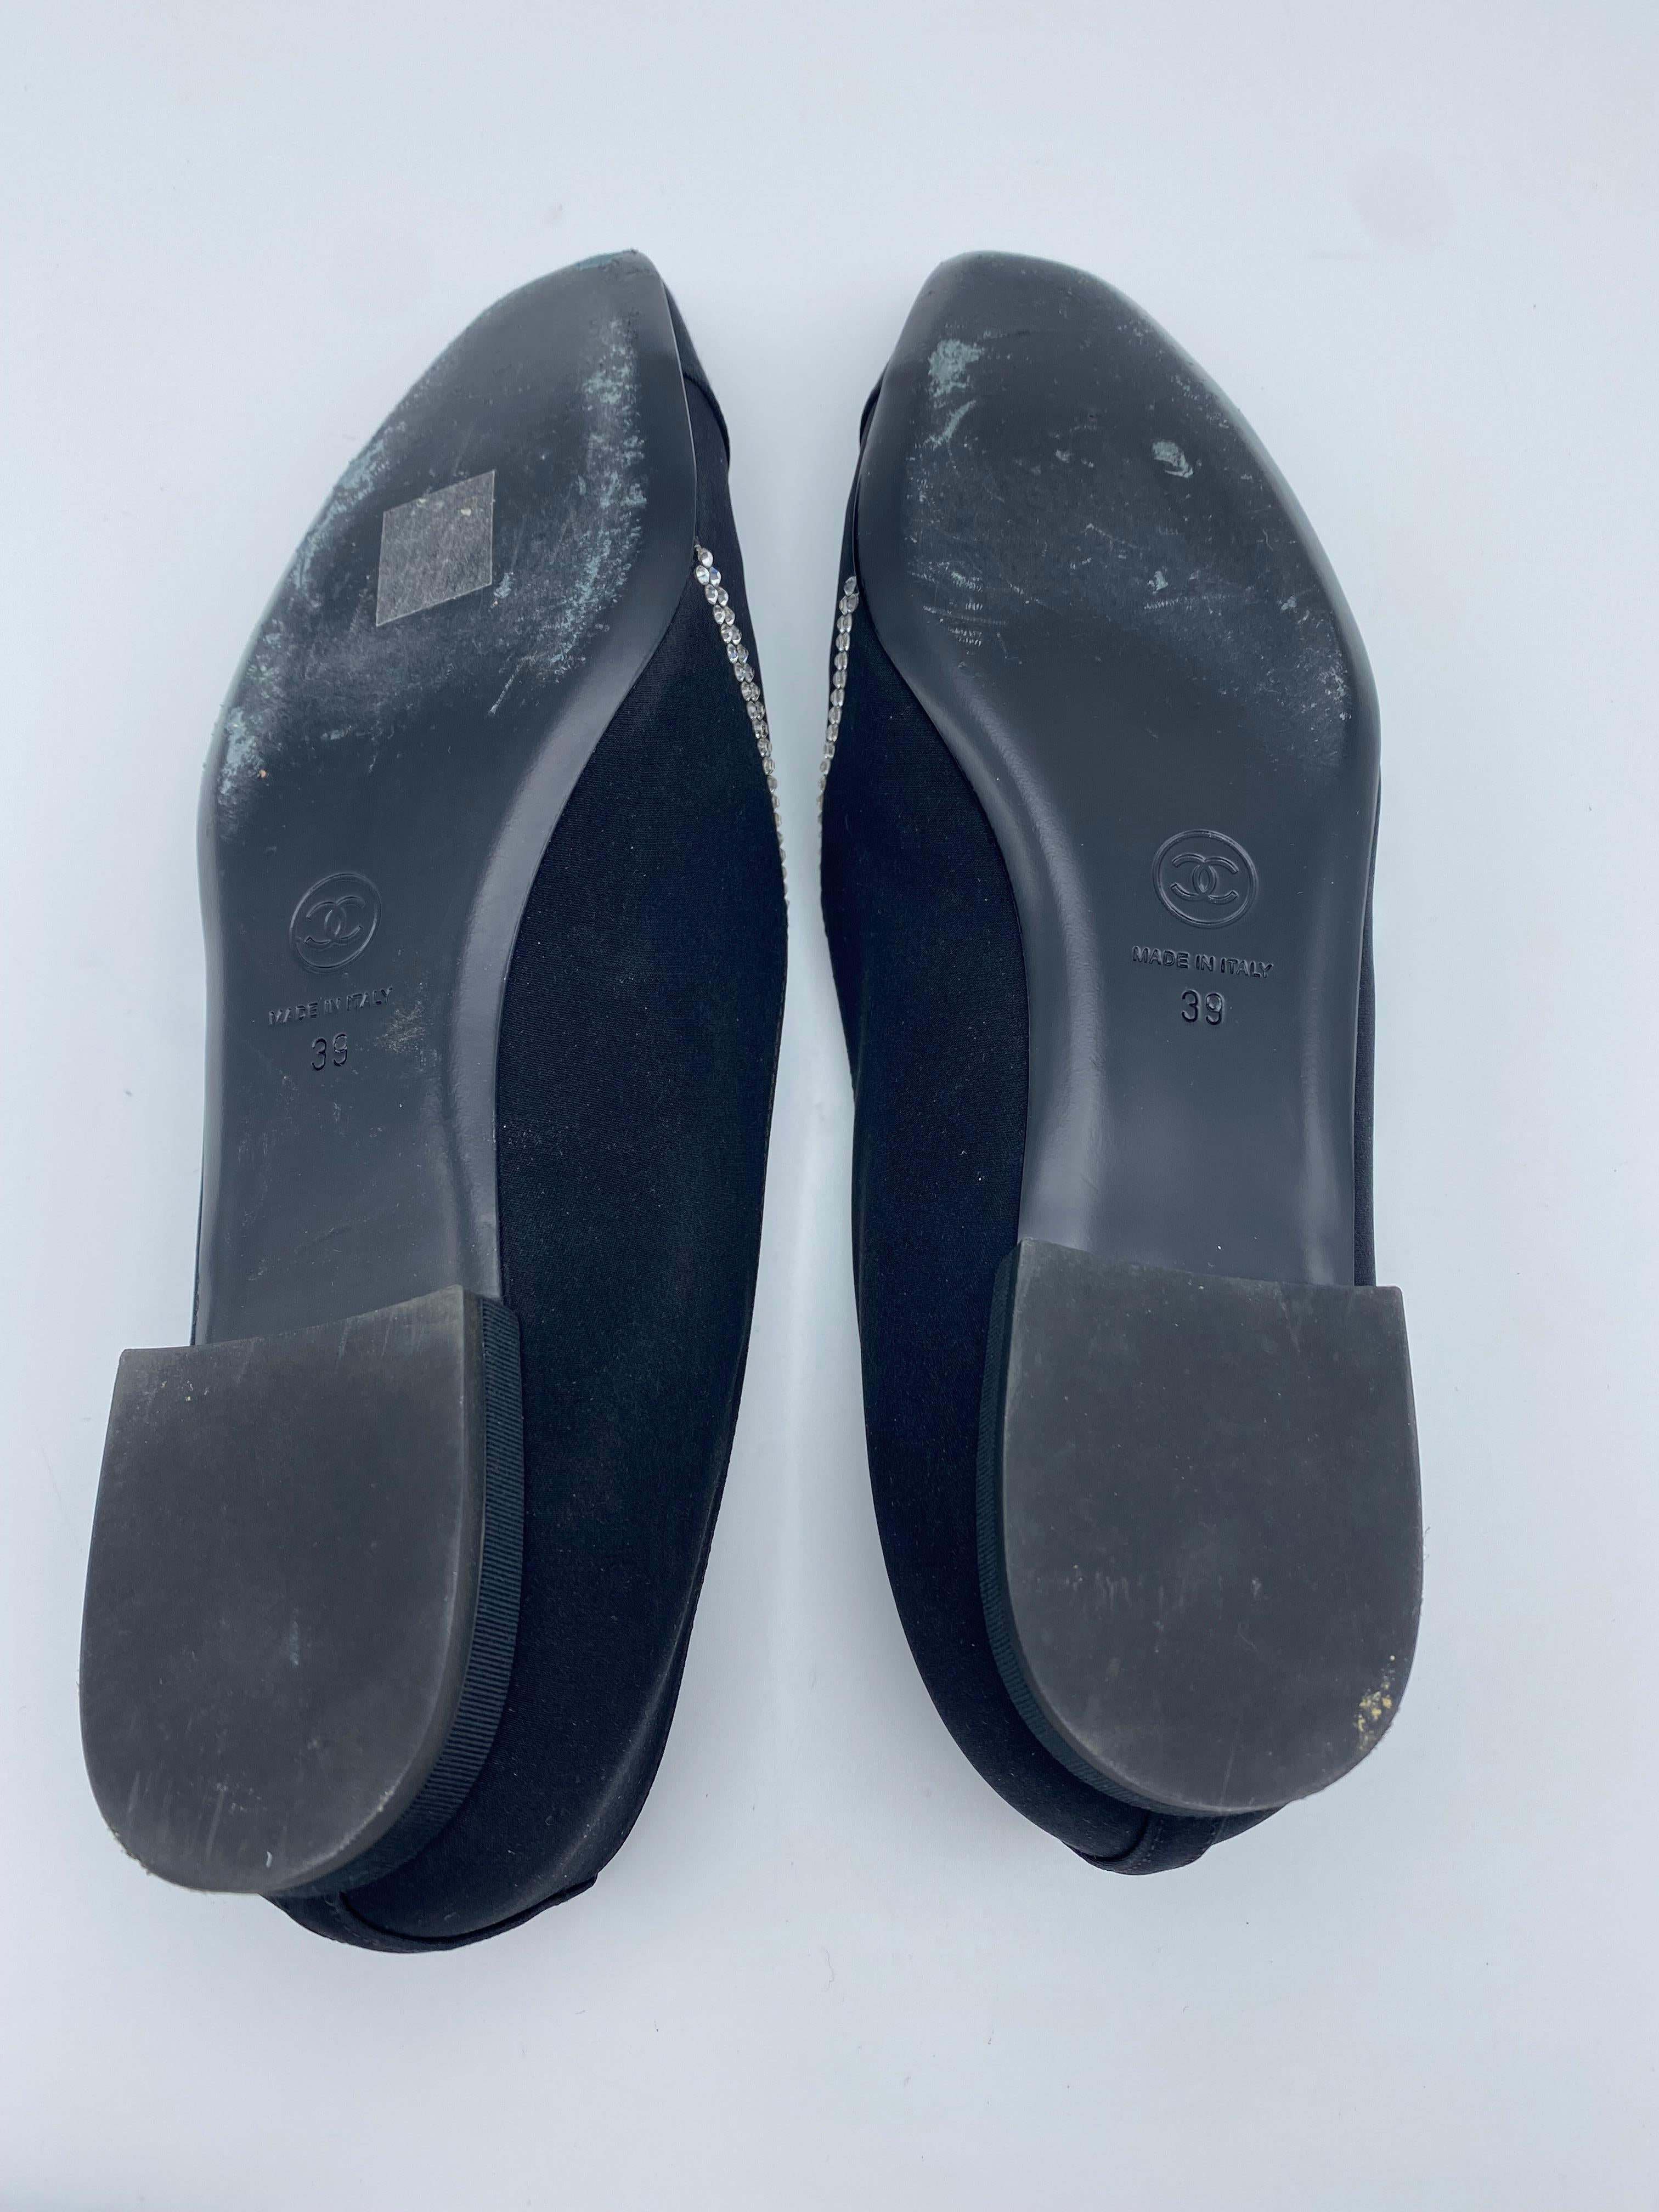 Chanel Black Star Loafers, Size 39 2